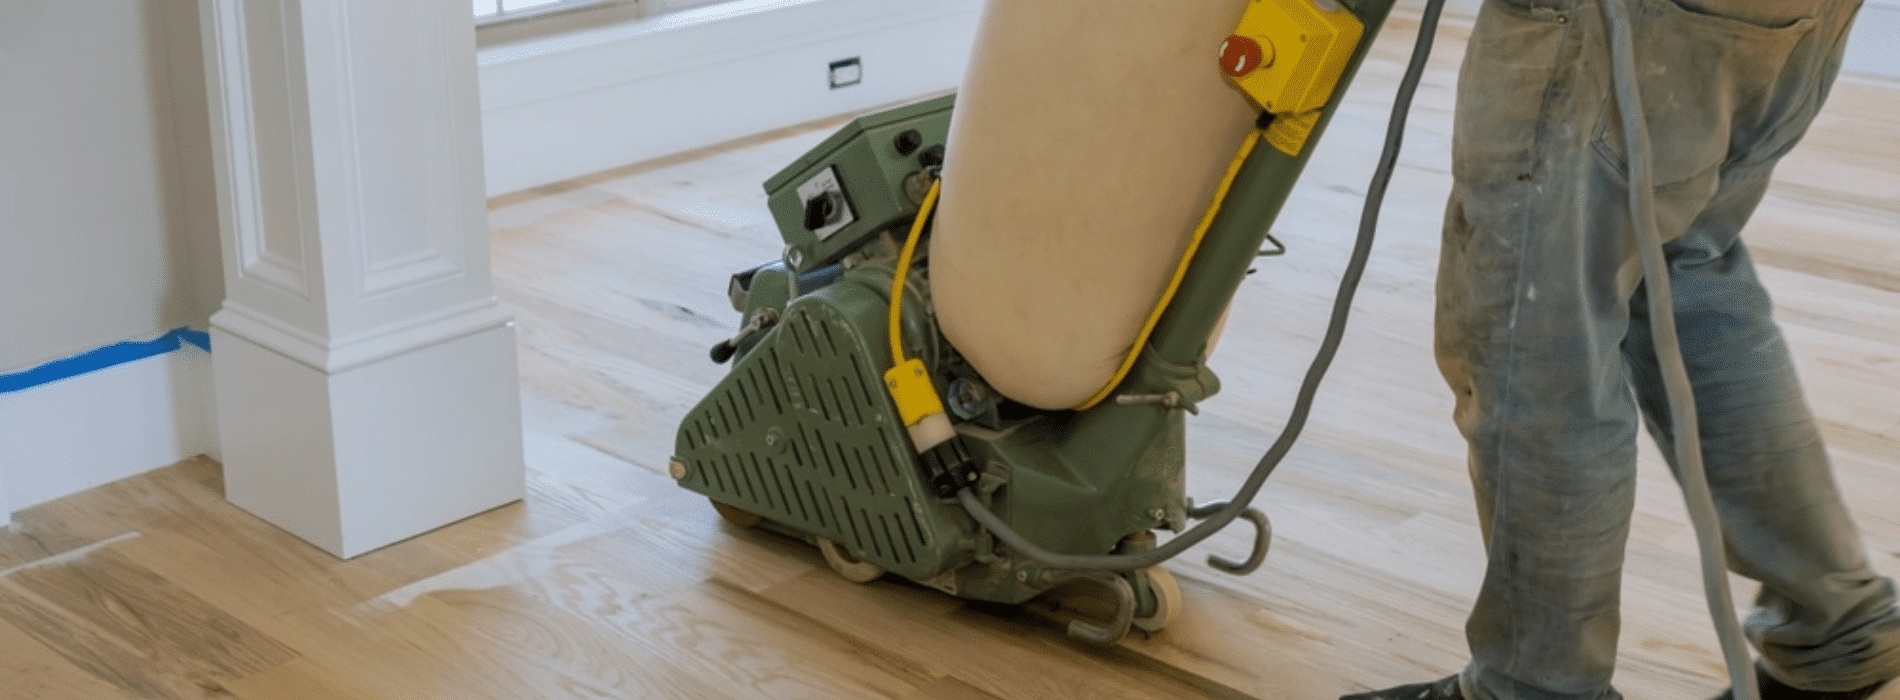 In Clayhall, IG5, Mr Sander® use a Bona Scorpion drum sander (200mm) with a 1.5 kW motor, operating at 240V and 50Hz. This powerful equipment is connected to a dust extraction system with a HEPA filter, ensuring a clean and efficient sanding process for herringbone floors.

